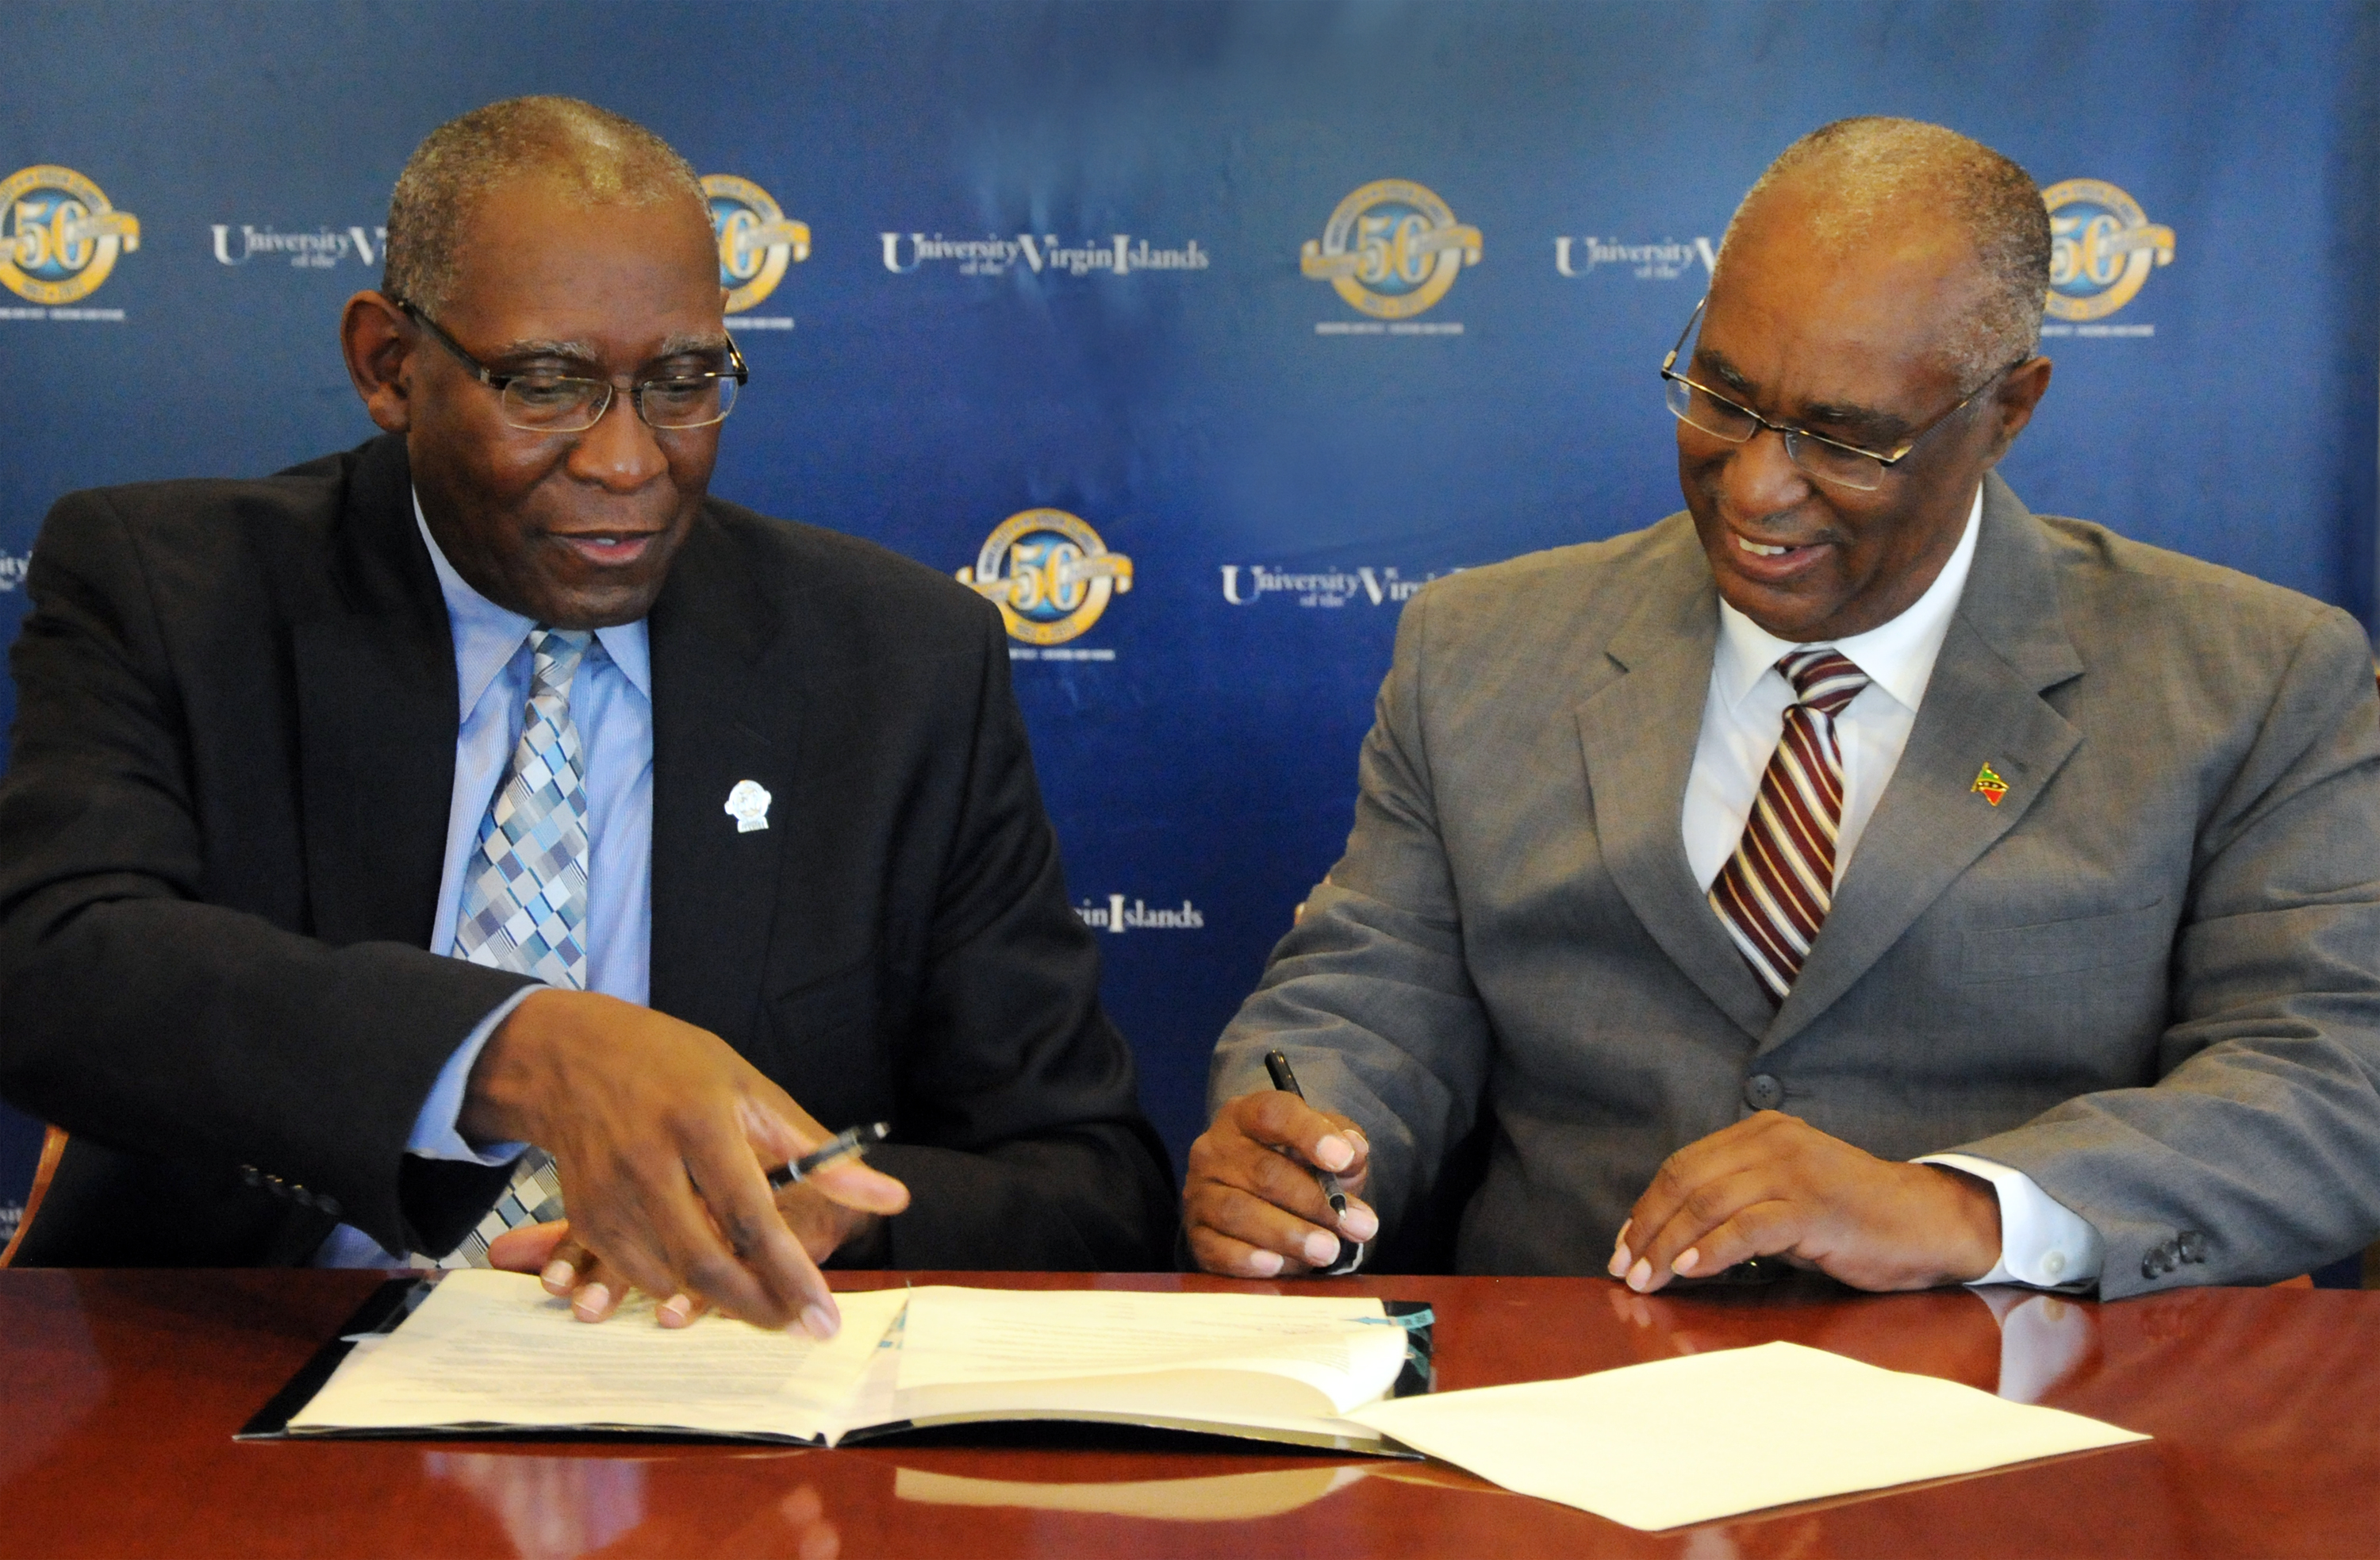 UVI President Dr. David Hall, left, and the Honorable Joseph Parry, Premiere of Nevis, sign an agreement that will allow graduates from the Nevis Sixth Form College to attend UVI at a tuition rate of only 1.75 times the rate for Virgin Islands residents. The agreement, signed at UVI on Nov. 2, also commits the Nevis Island Administration to provide scholarships for students from Nevis to attend UVI. 